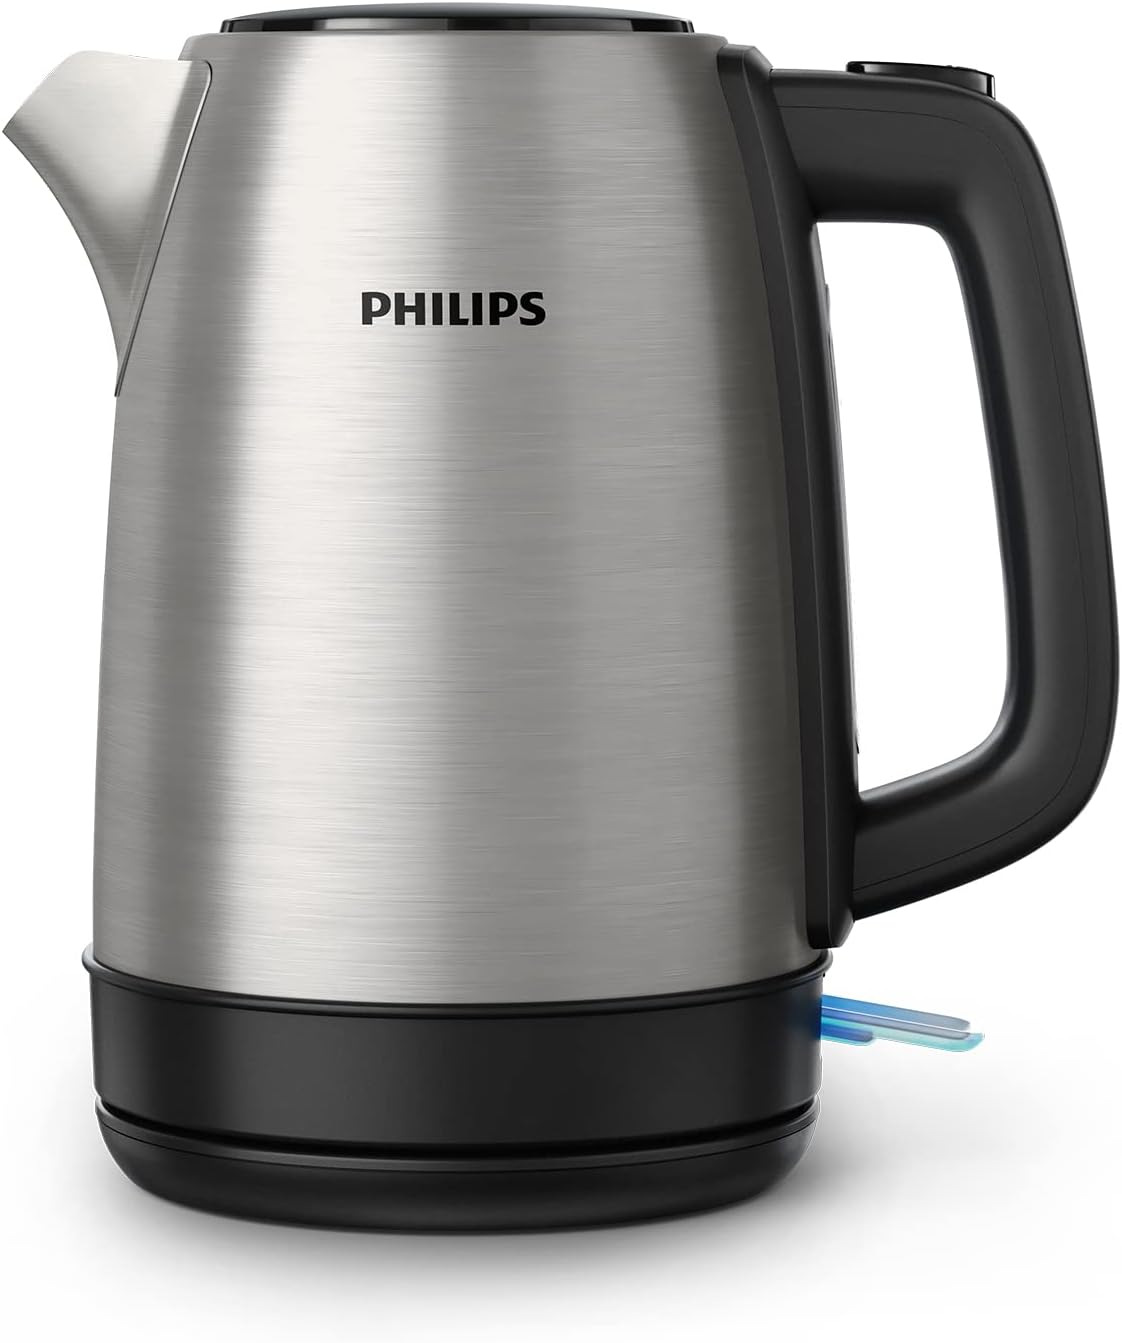 Philips Daily Collection Metall-Wasserkocher